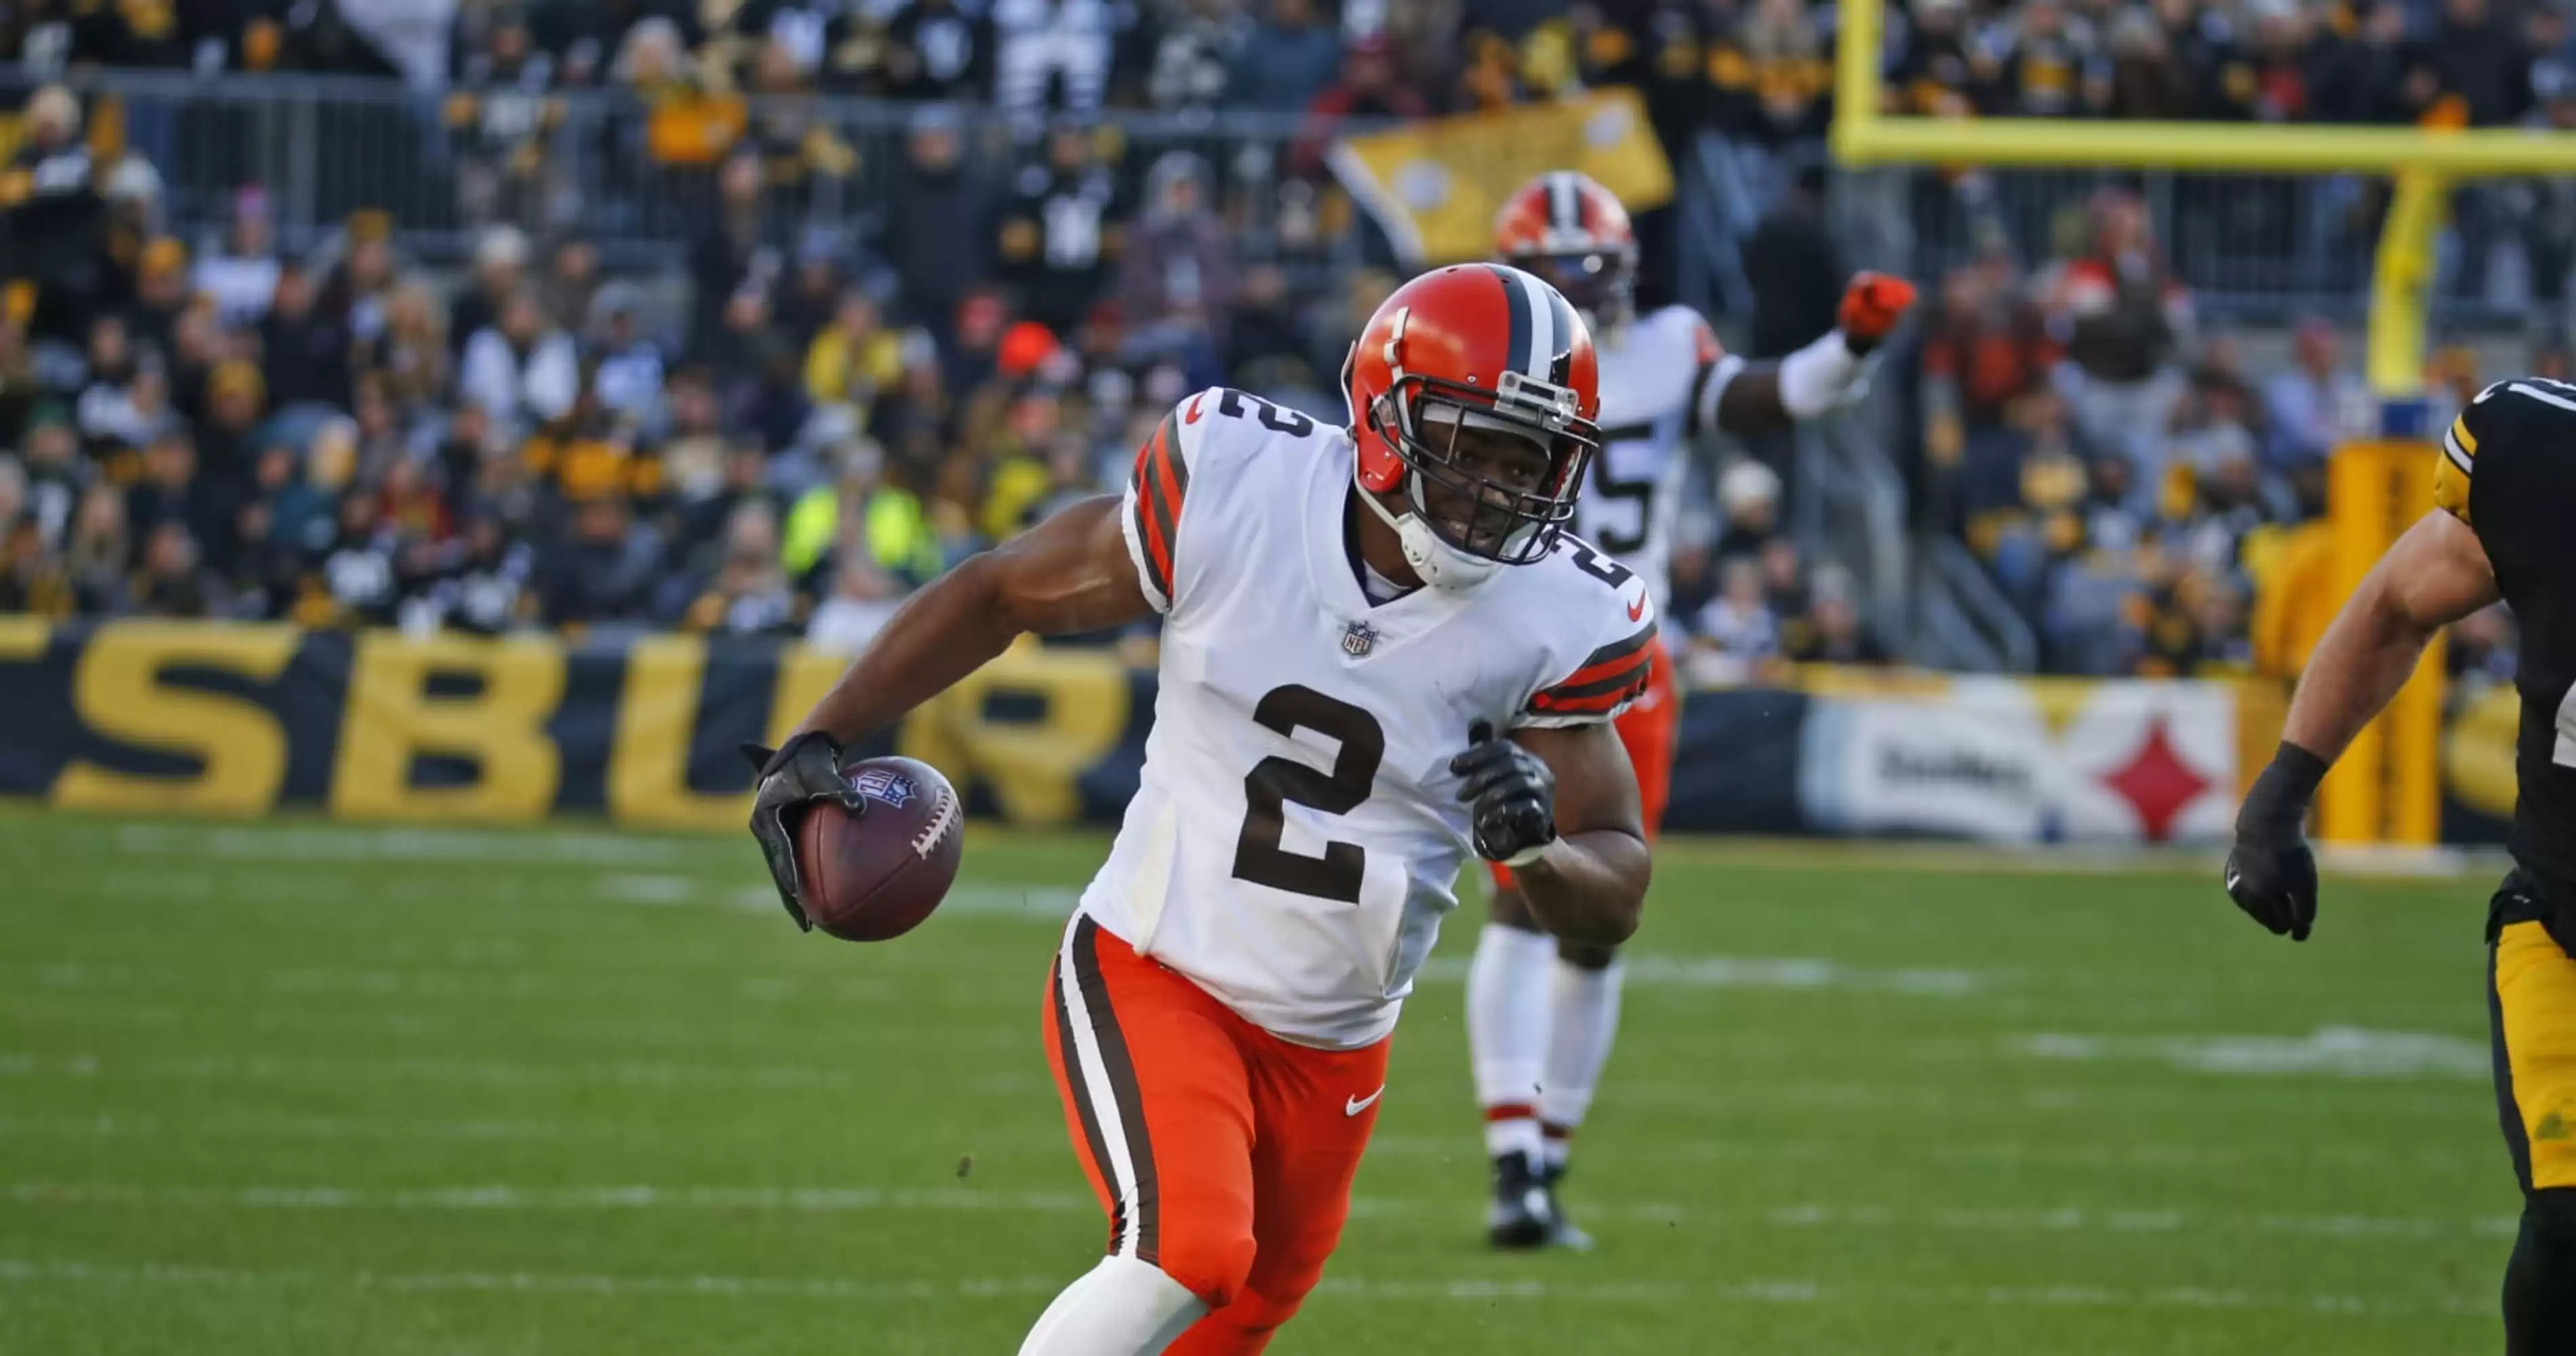 Browns Amari Cooper Unlikely to Play vs. Steelers After Aggravating Groin Injury